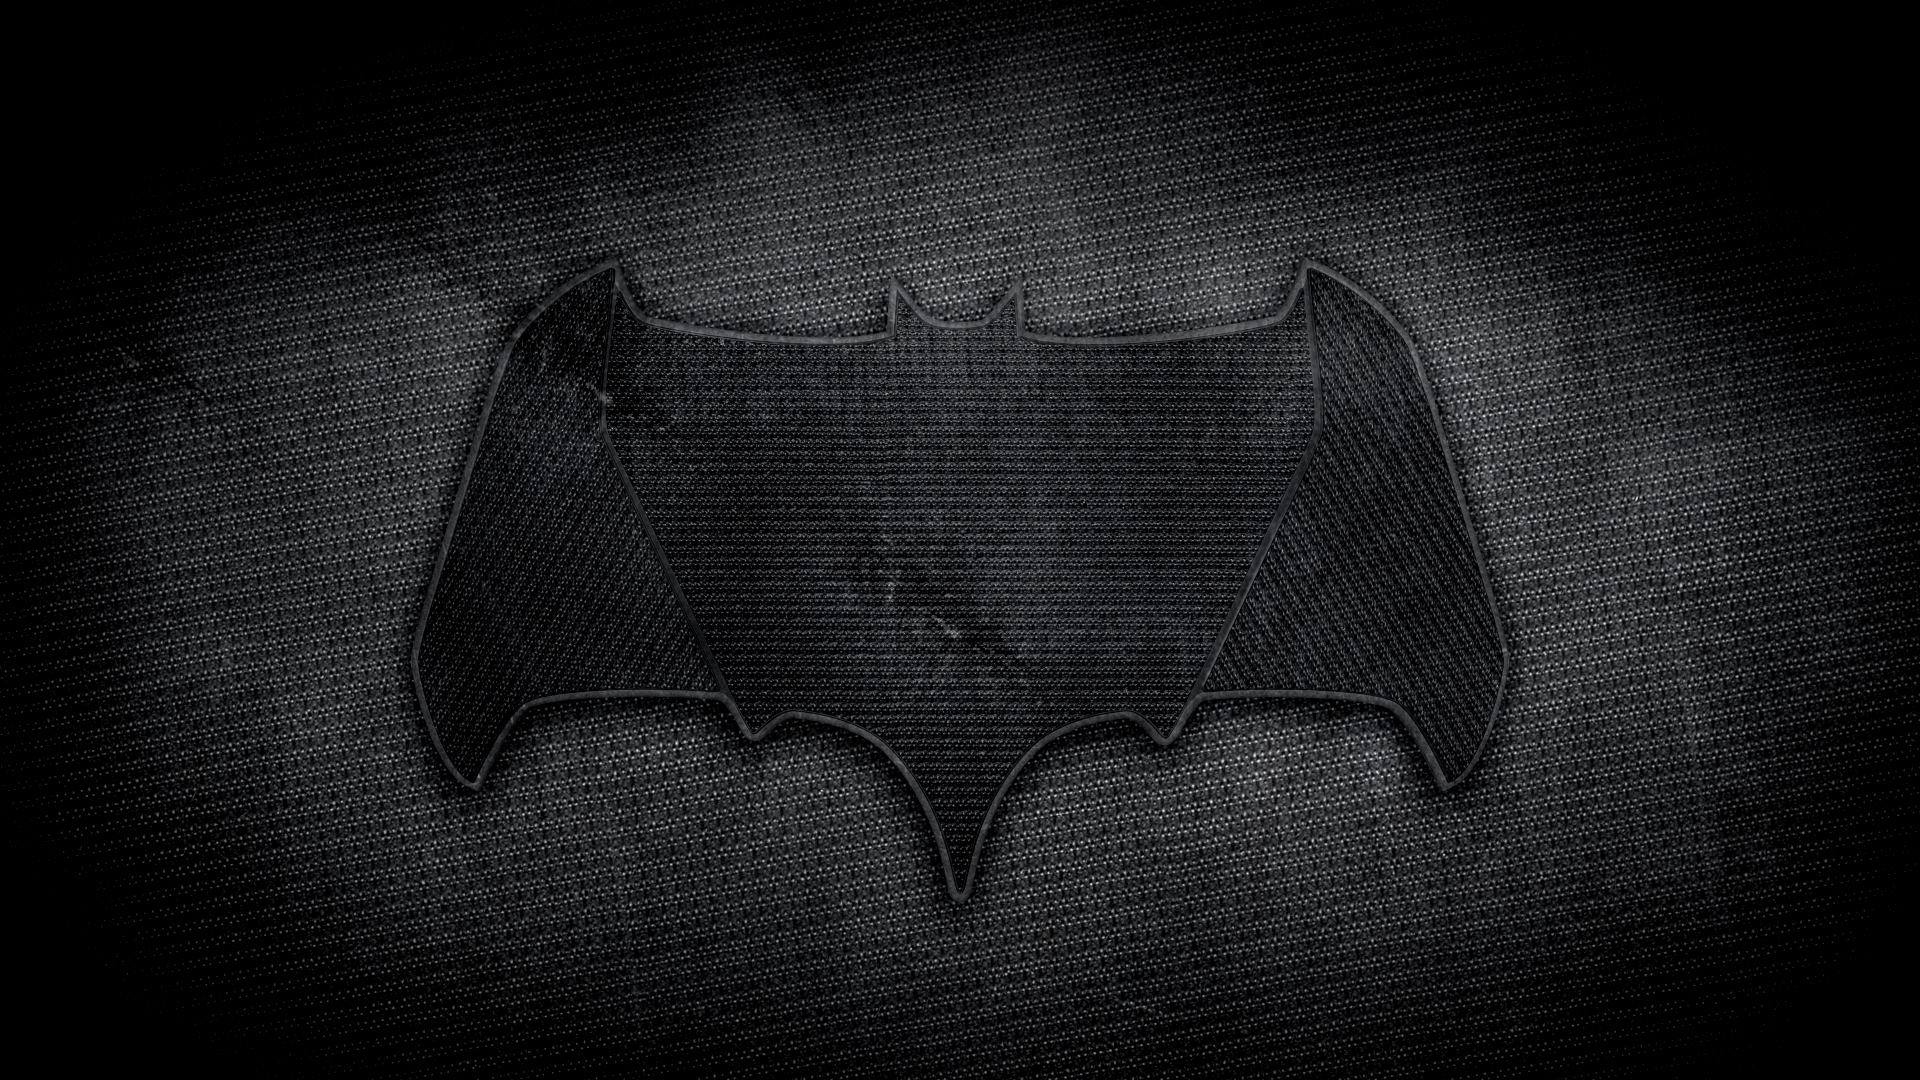 New Bat Logo - Found a nice wallpaper of the new Bat design, thought you guys might ...